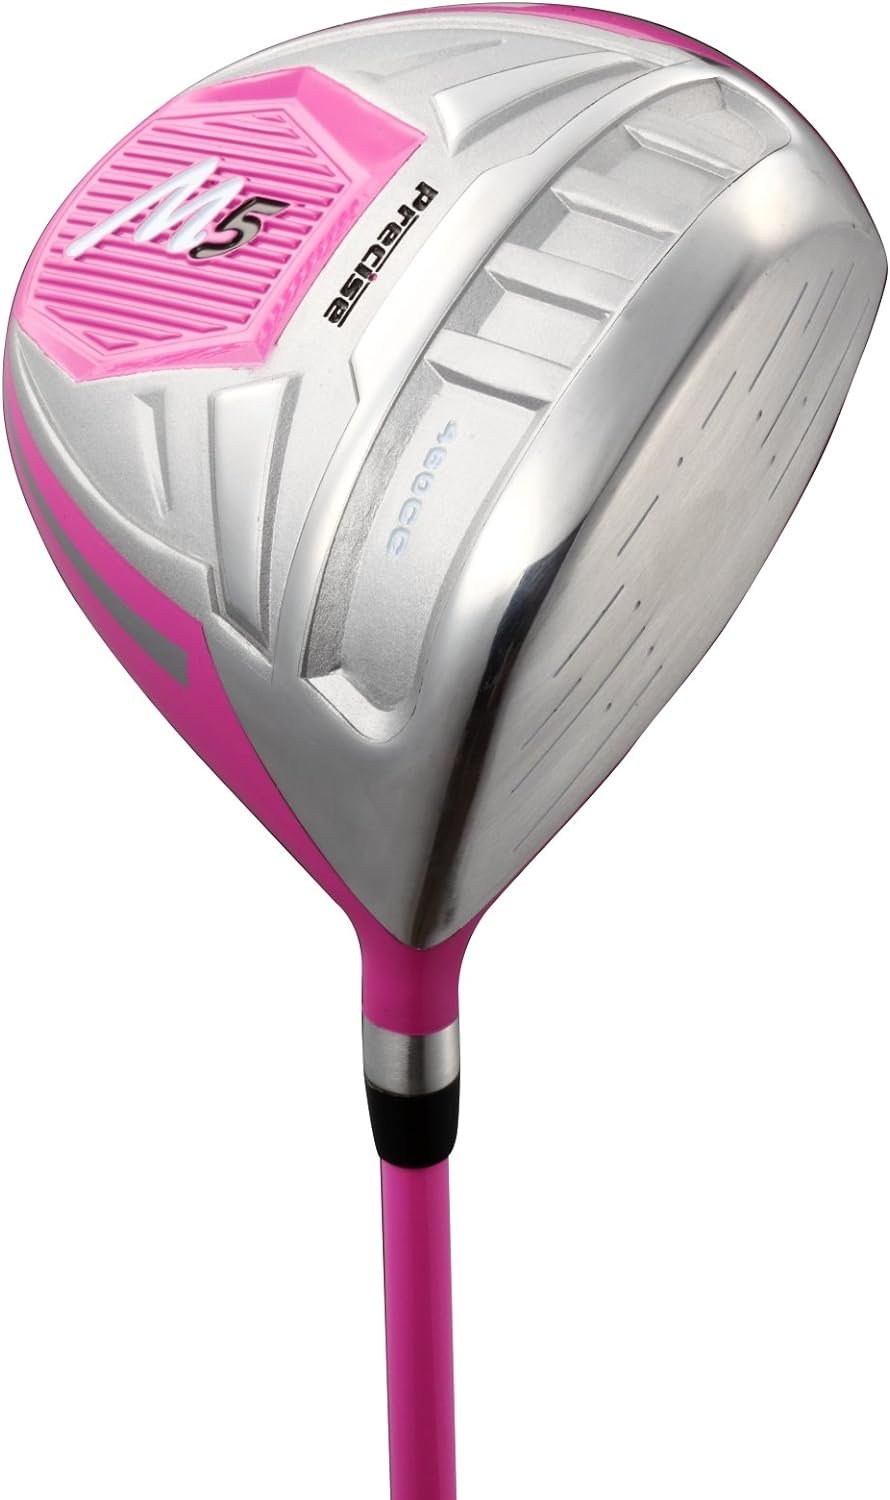 Women’s Golf Sets: A Comparative Review of Top 5 Products